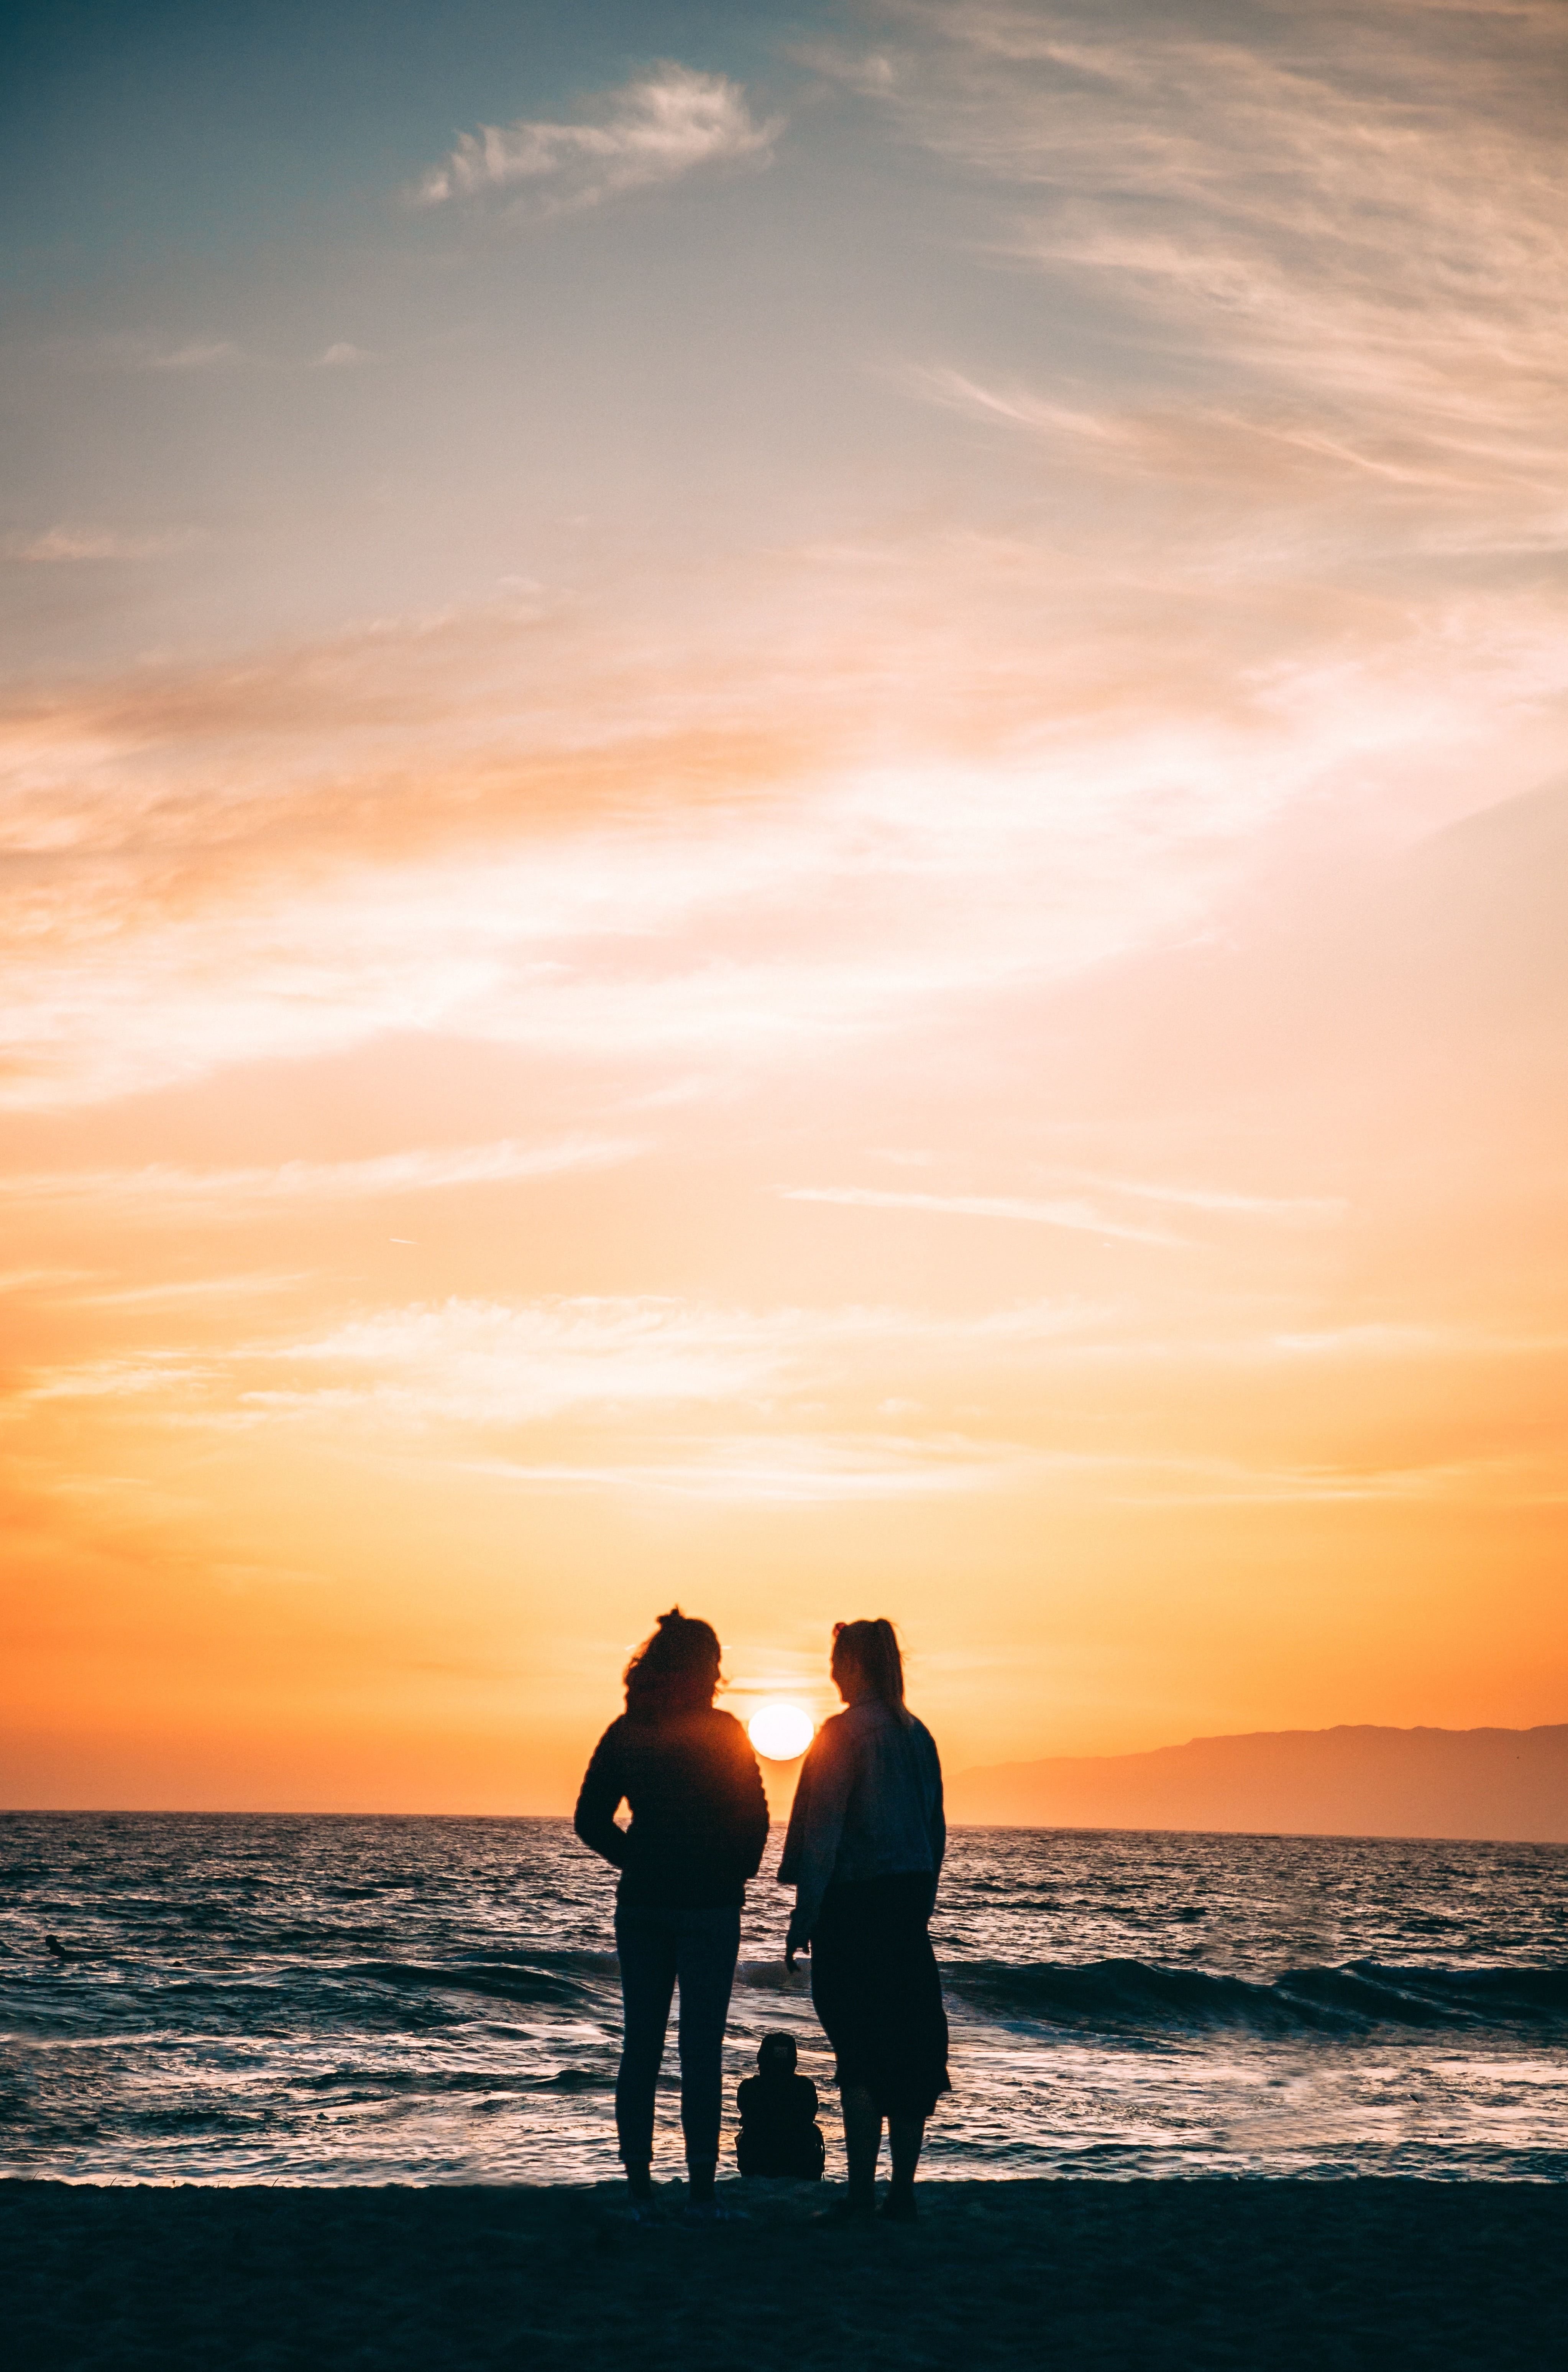 silhouette of woman, family, silhouettes, sea, shore, sunset